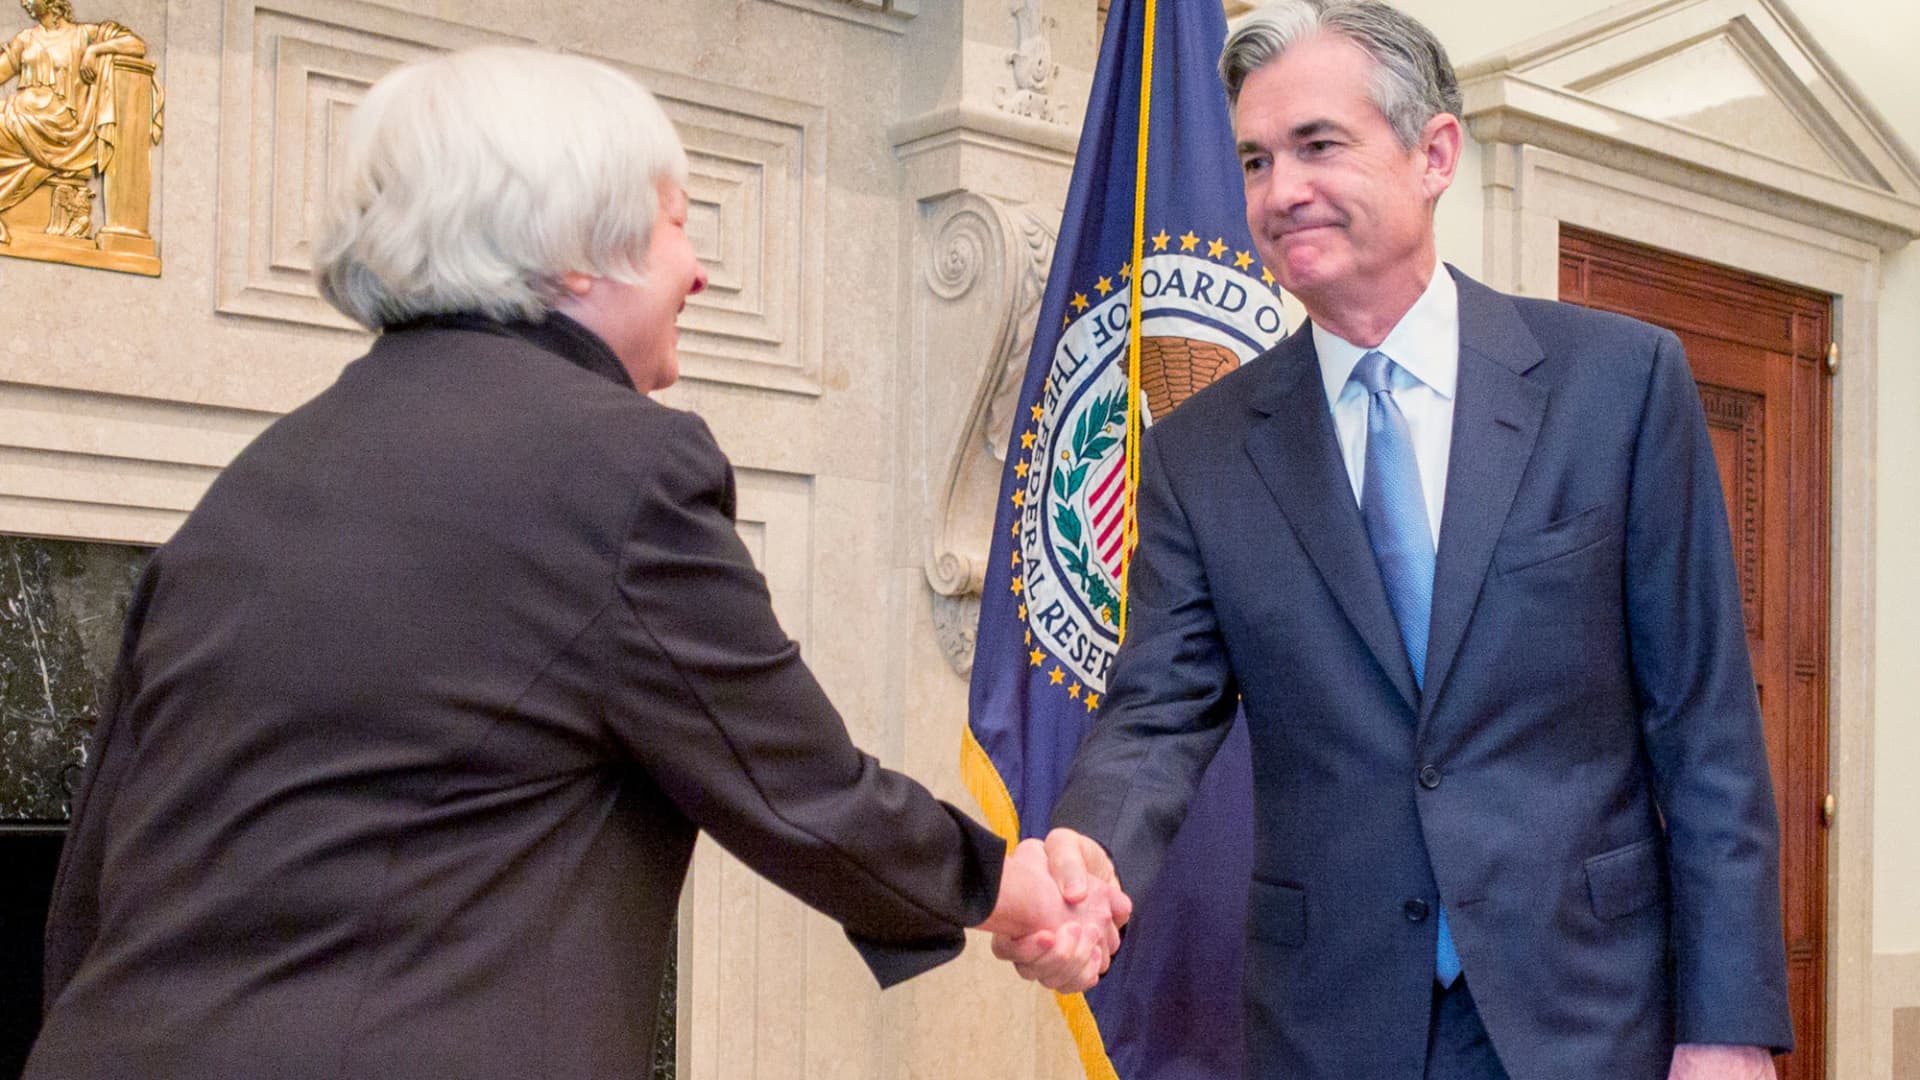 Federal Reserve Chair Janet Yellen (L) congratulates Fed Governor Jerome Powell at his swearing-in ceremony for a new term on the Fed's board, in Washington in this handout photo taken and released June 16, 2014.